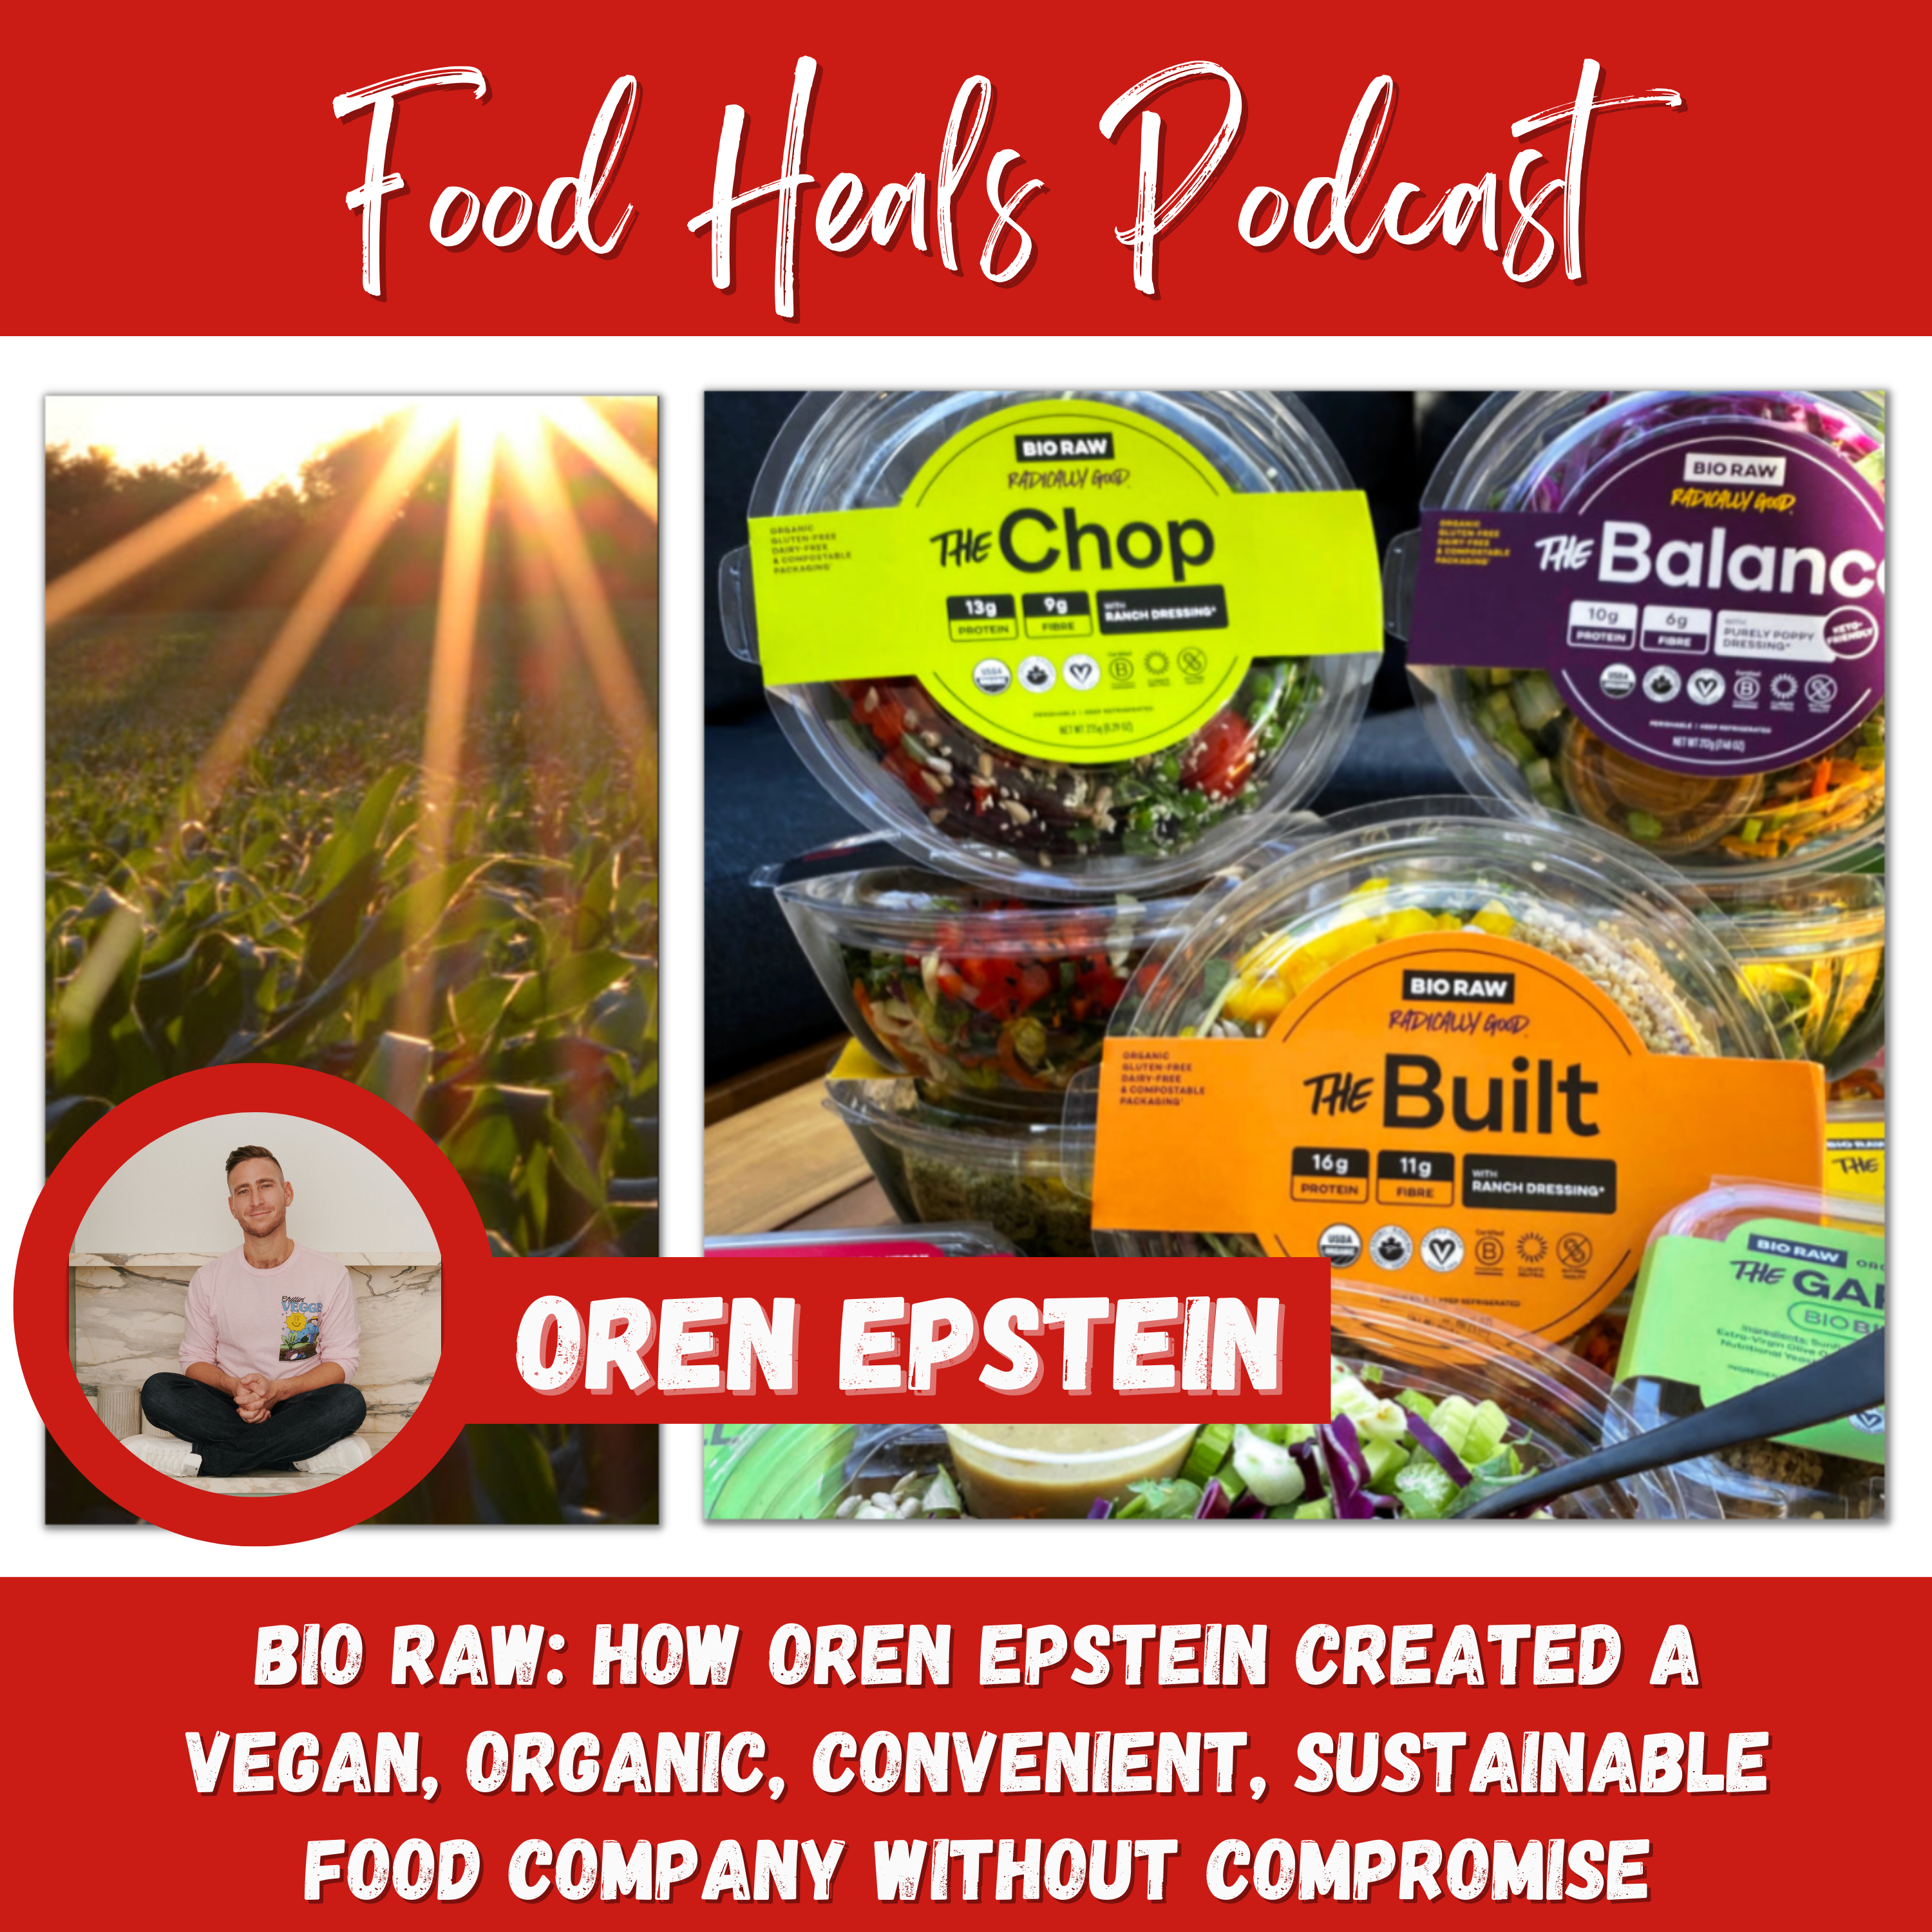 BIO RAW: How Oren Epstein Created a Vegan, Organic, Convenient, Sustainable Food Company Without Compromise